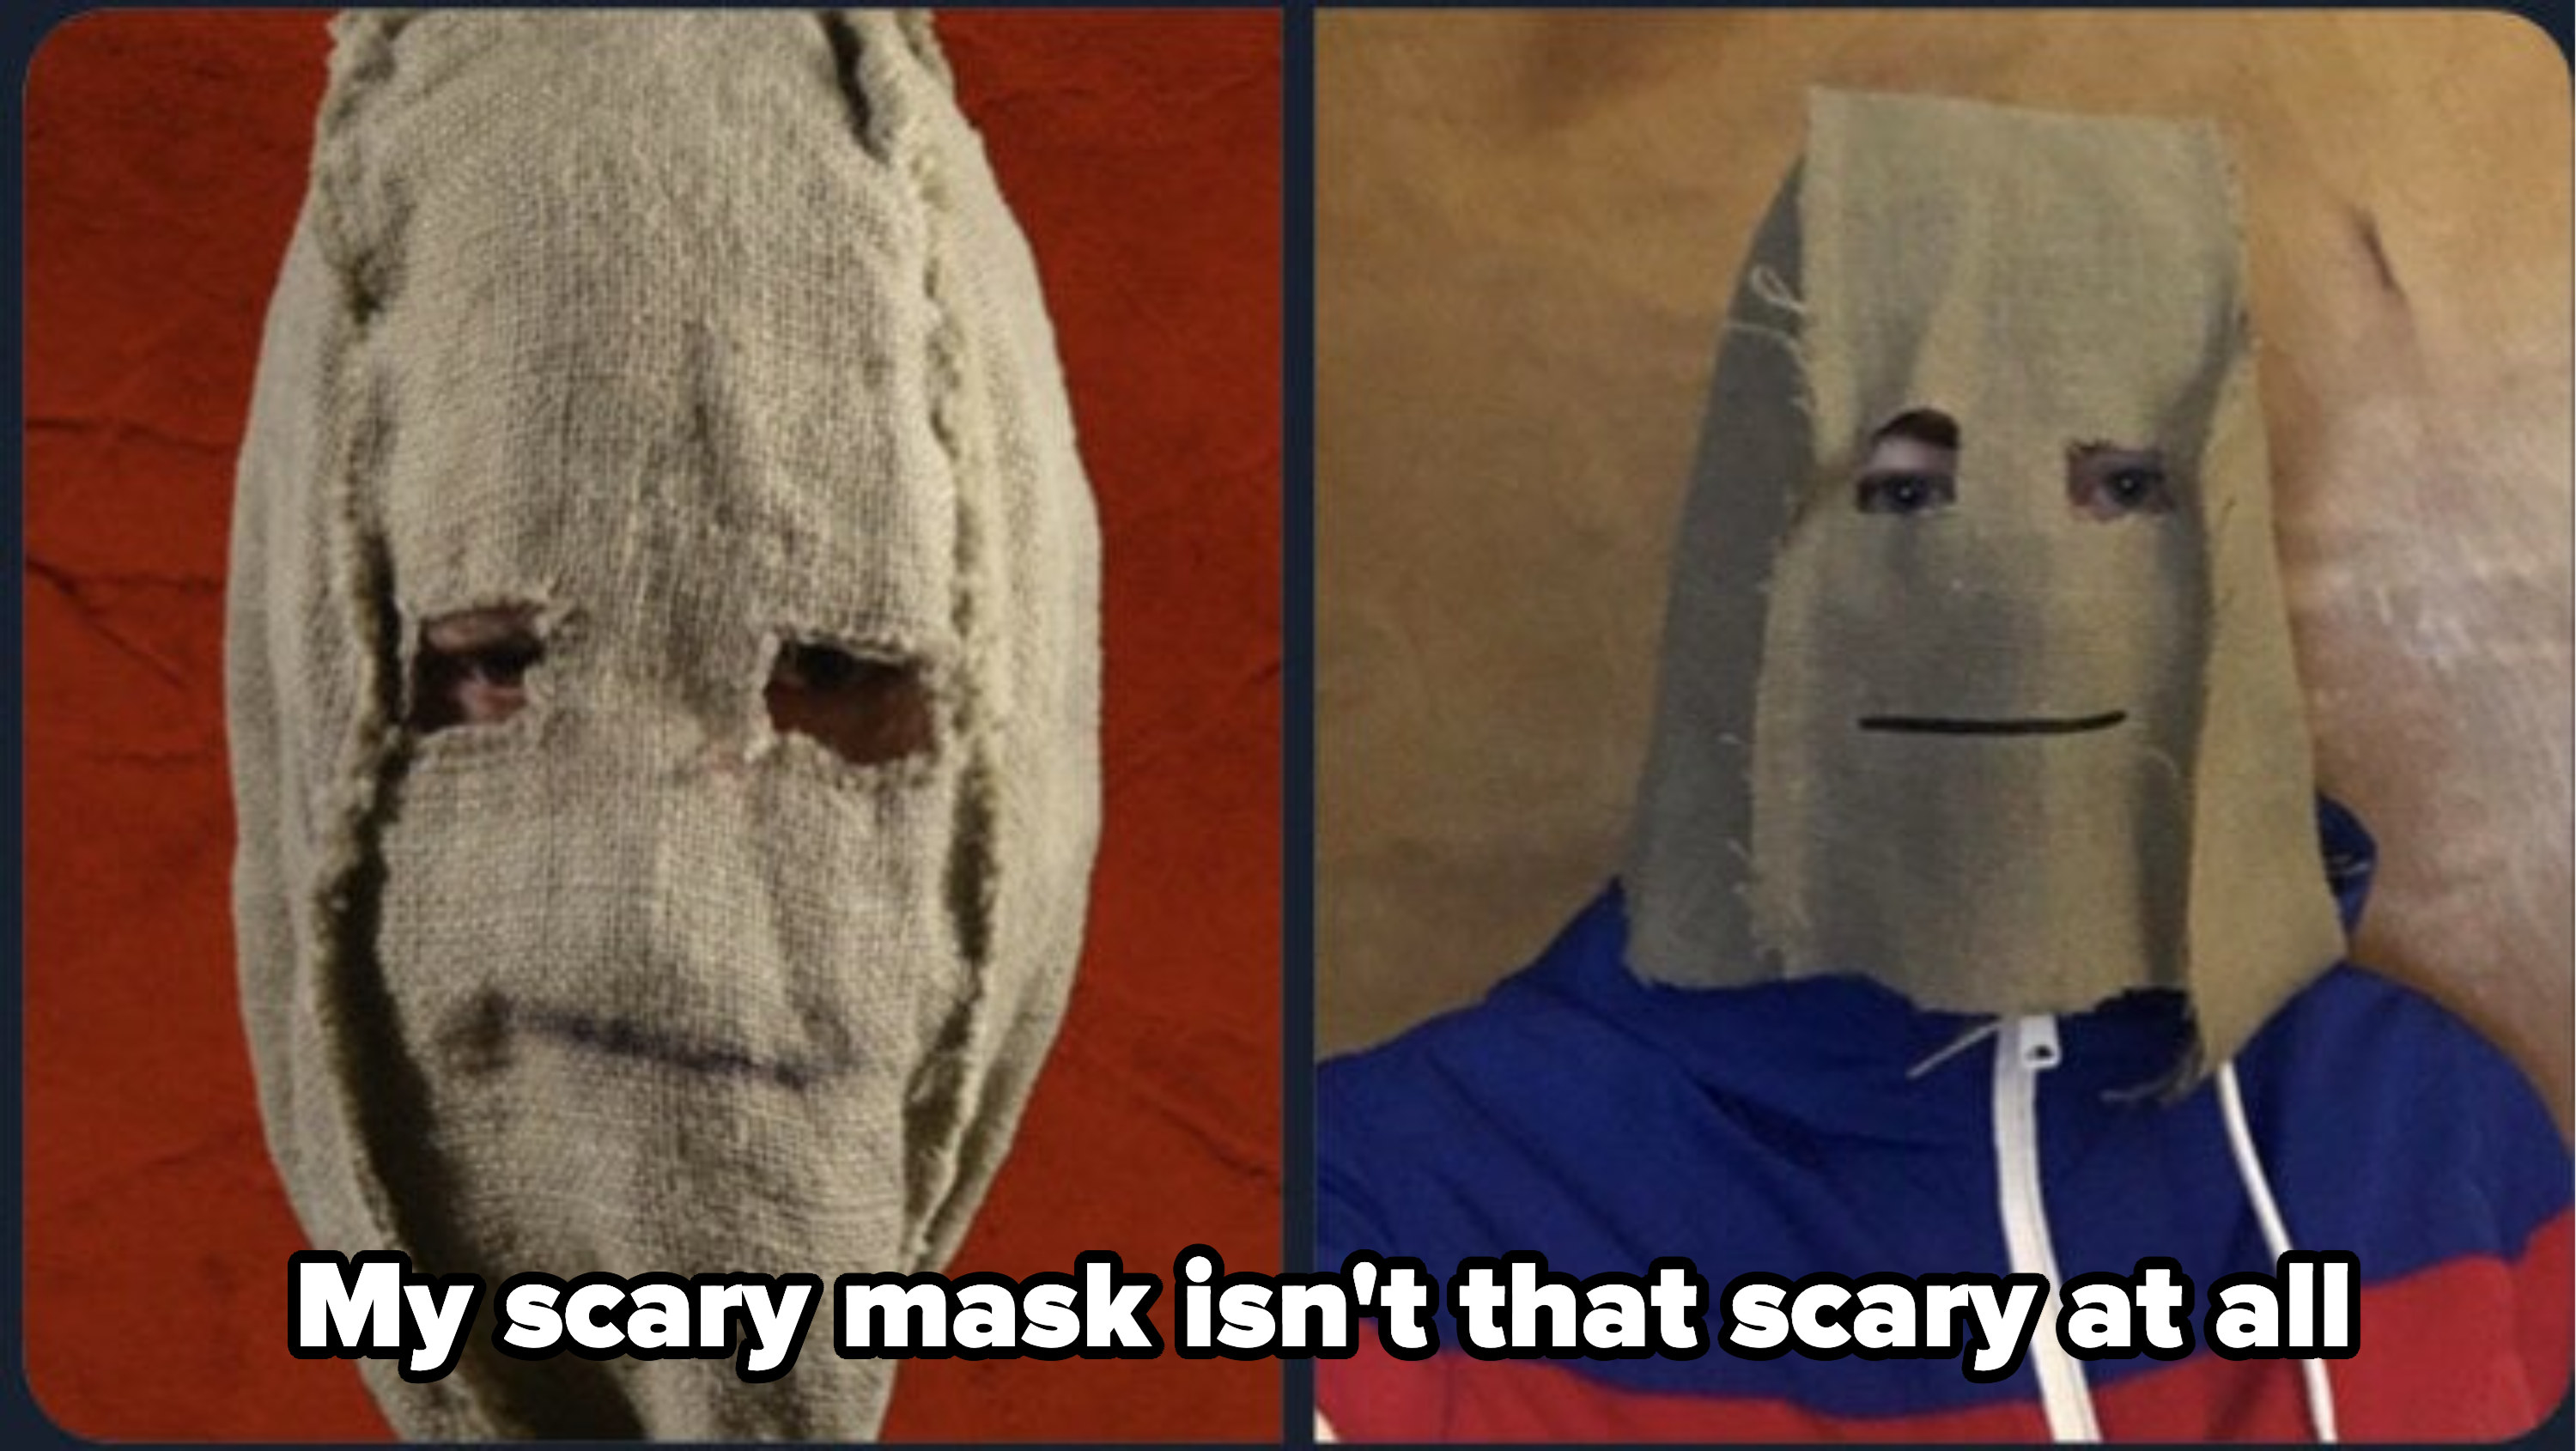 &quot;My scary mask isn&#x27;t that scary at all&quot;